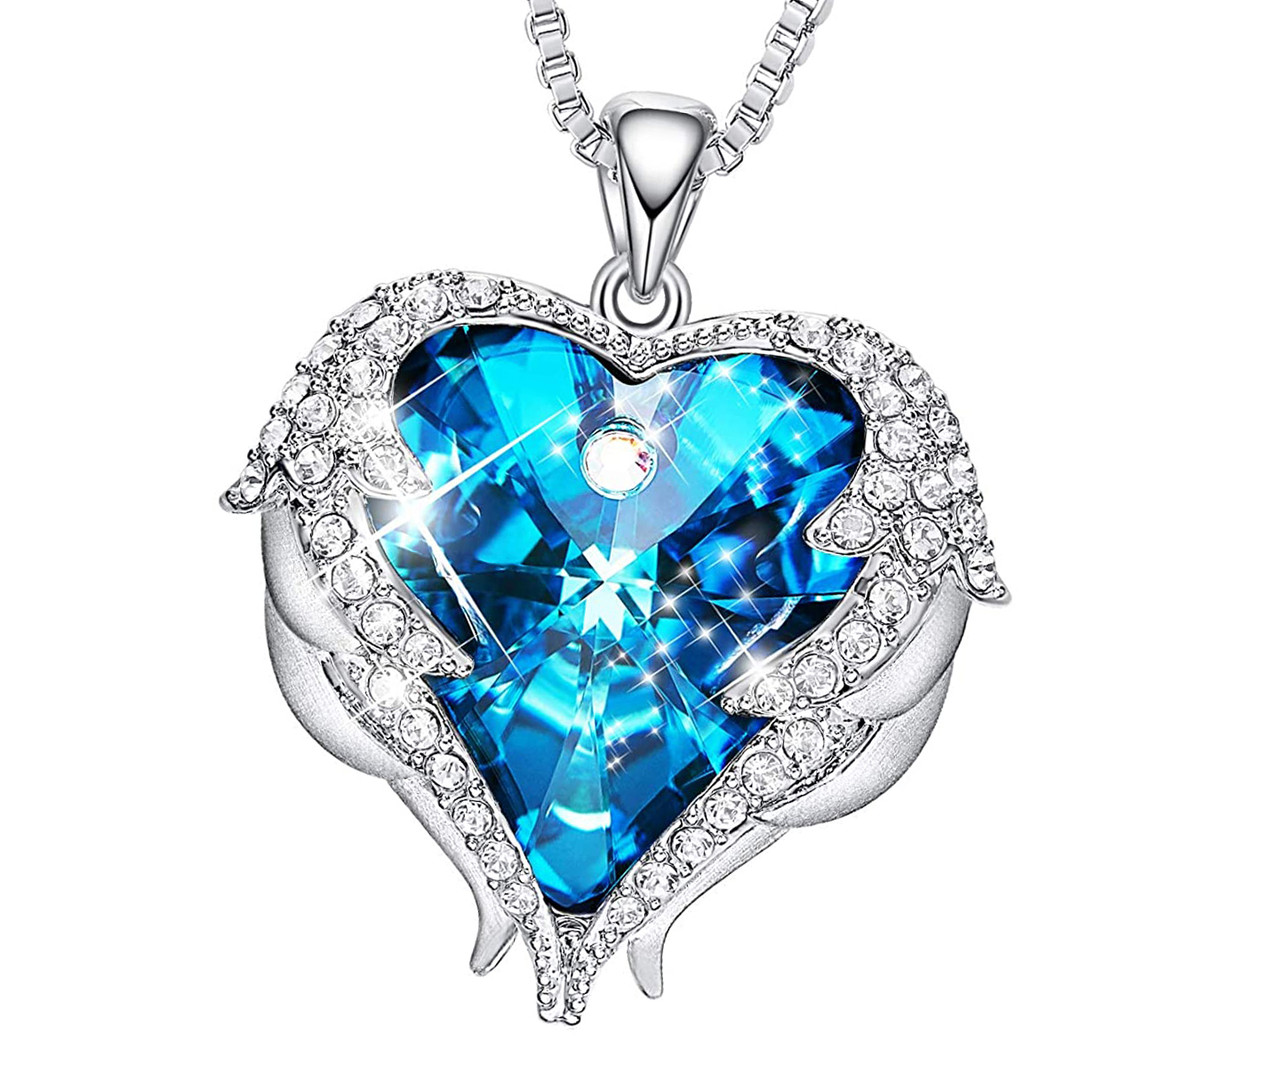 Angel Wings Heart Crystal Heart Light Blue Pendant - (Silver Tone)  with 18" Chain Necklace. Gift for Lover, Girl Friend, Wife, Valentine's Day Gift, Mother's Day, Anniversary Gift Necklace.